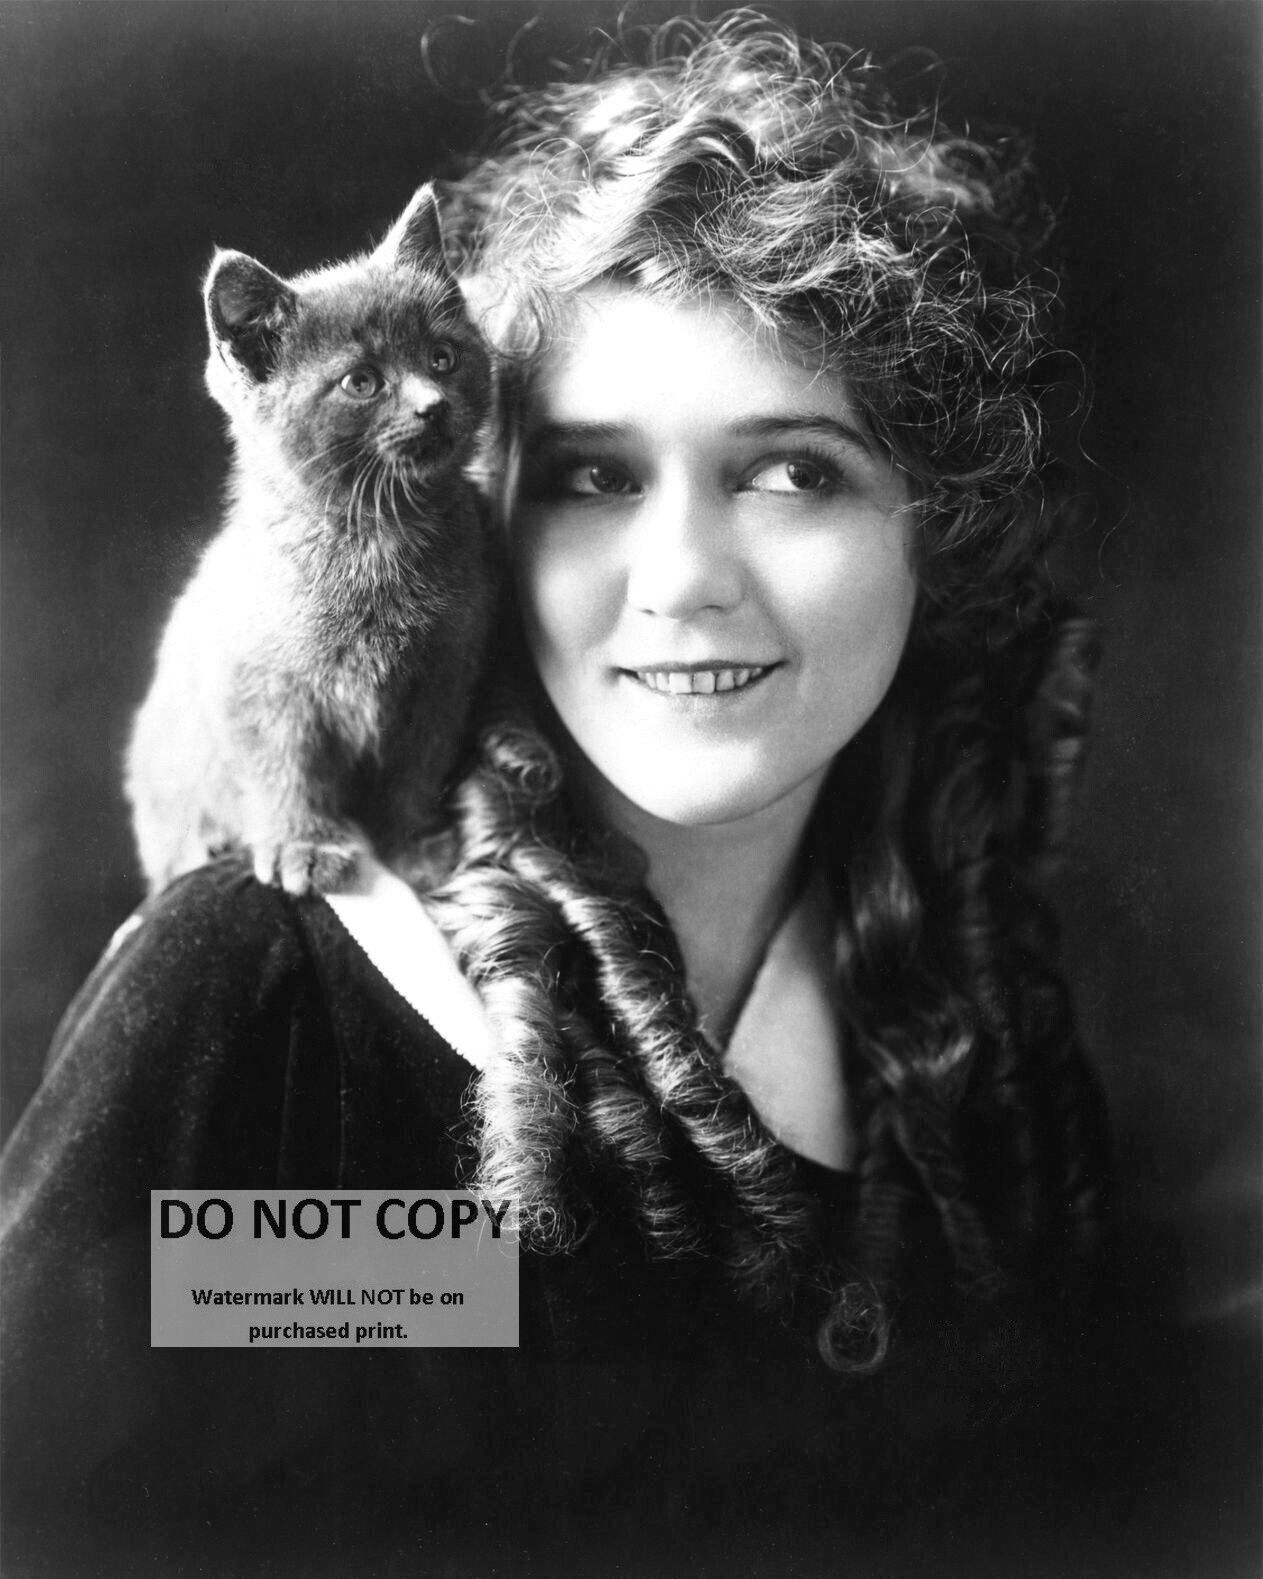 ACTRESS MARY PICKFORD WITH A KITTEN - 8X10 PUBLICITY PHOTO (AB-620)